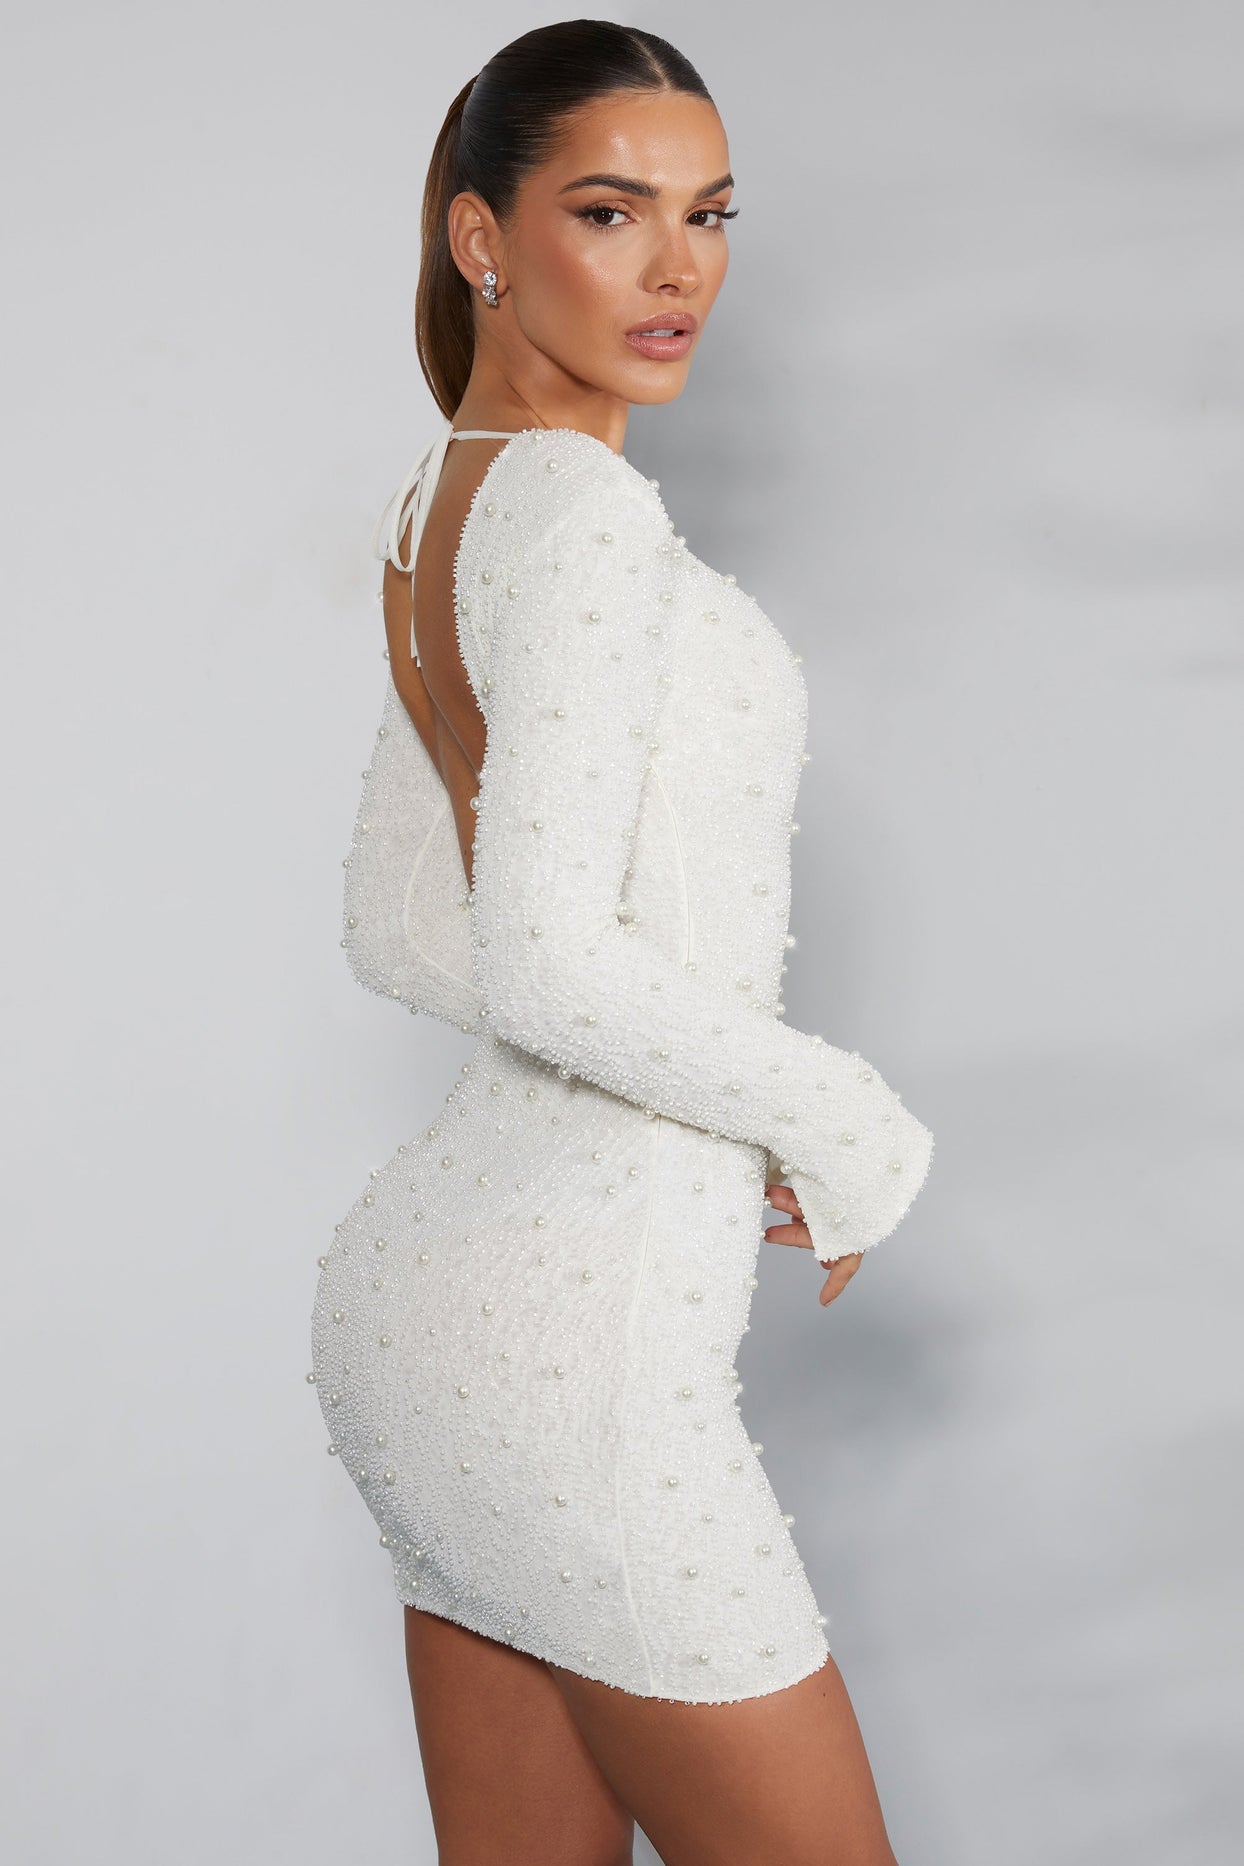 Hague Long Sleeve Embellished Backless Mini Dress in Ivory | Oh Polly